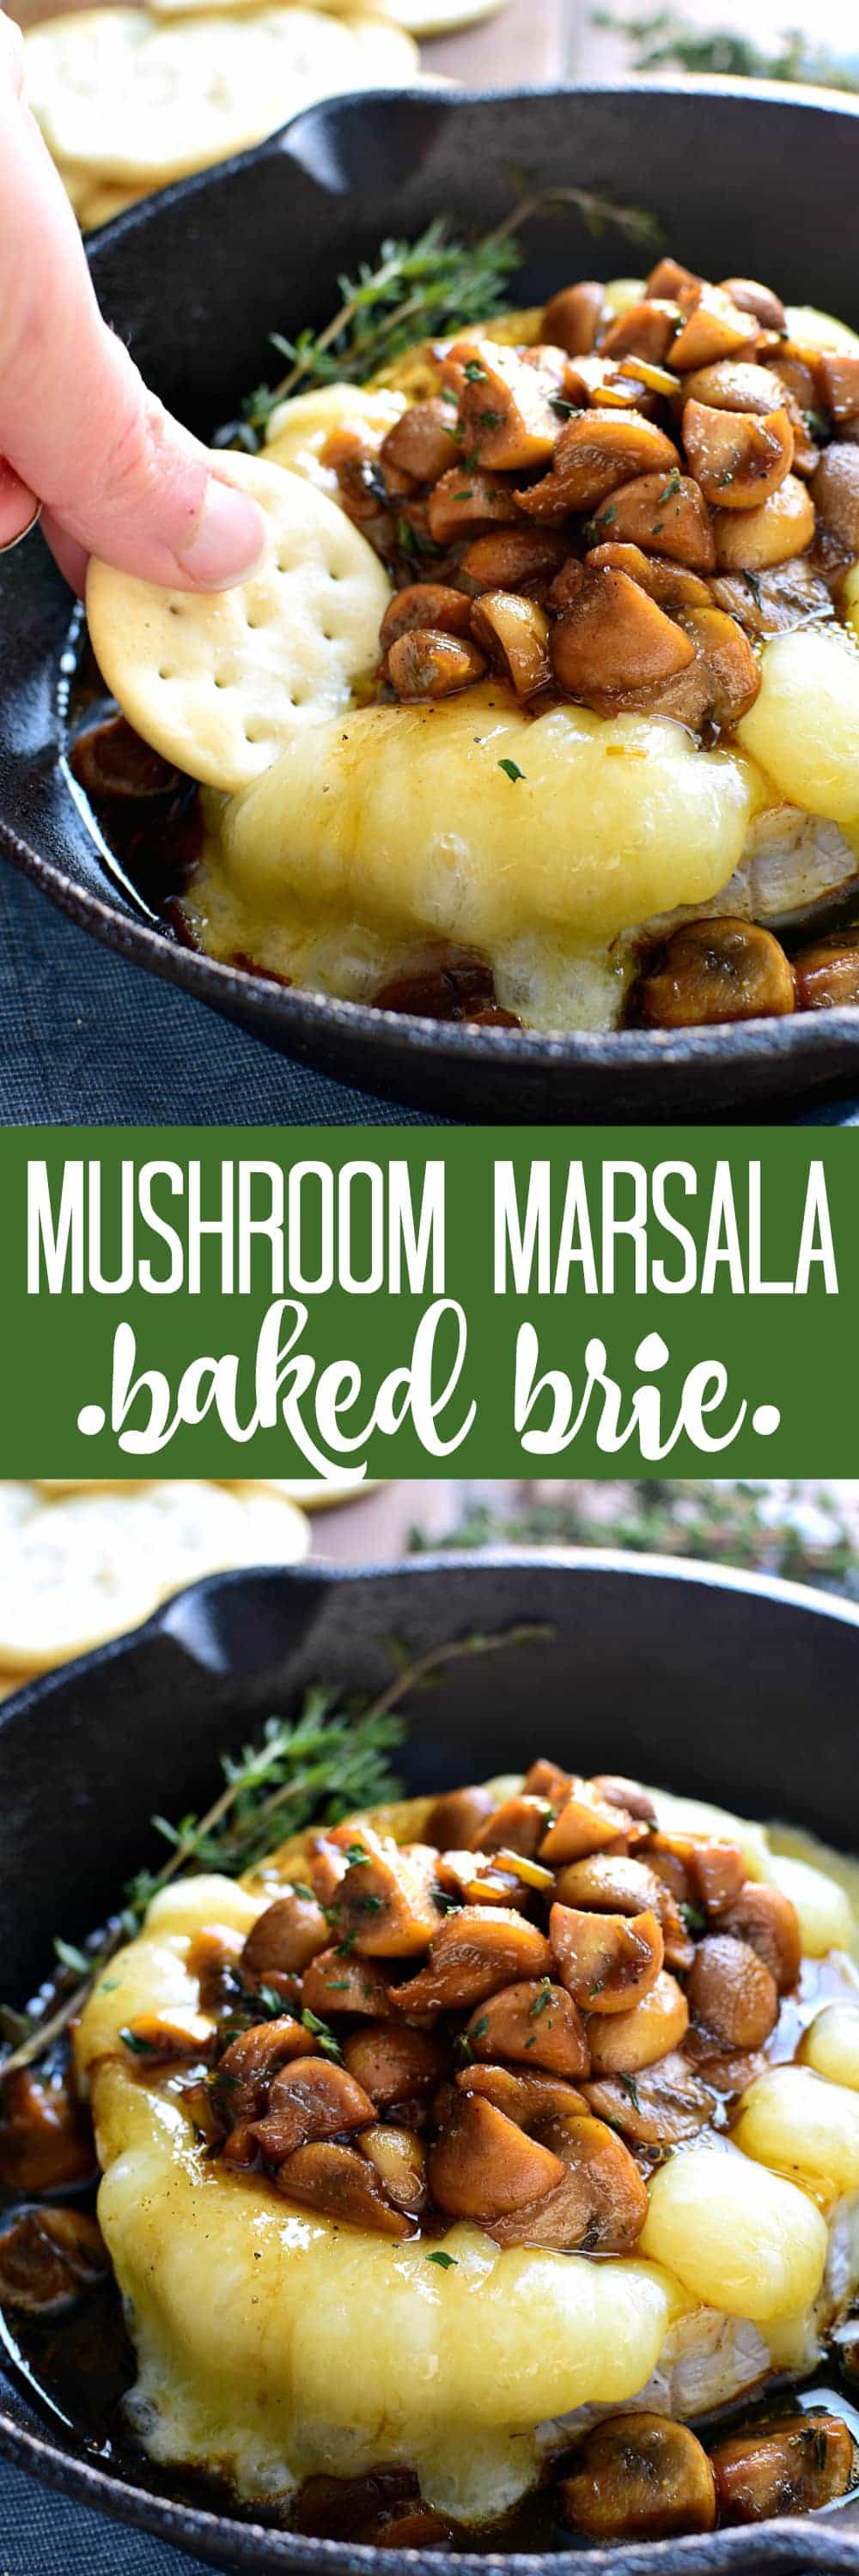 Mushroom Marsala Baked Brie combines rich marsala-glazed mushrooms with creamy baked brie in a delicious appetizer that's perfect for New Years Eve or anytime!